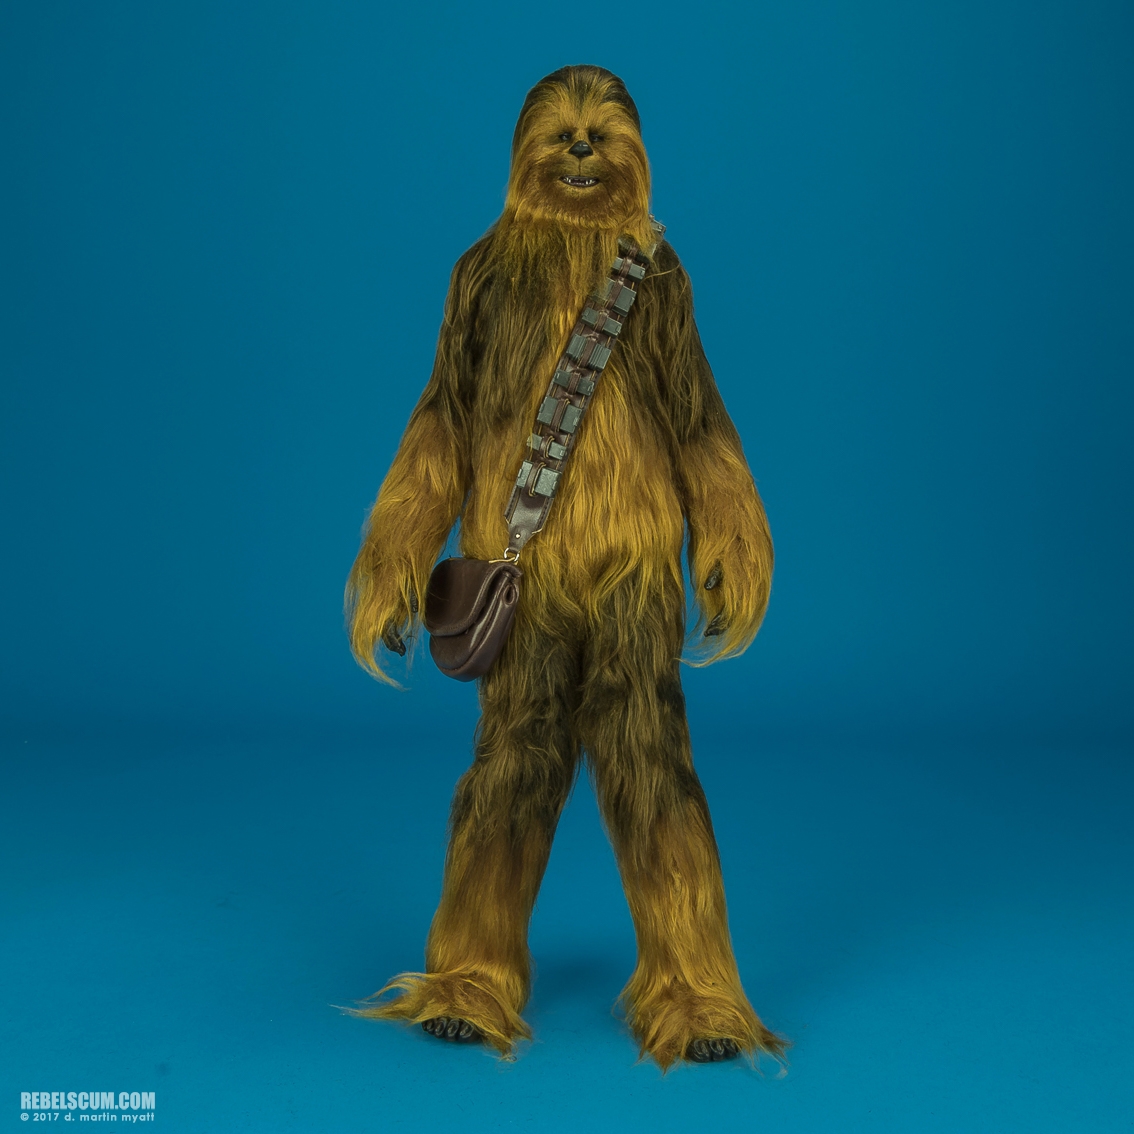 MMS376-Han-Solo-Chewbacca-The-Force-Awakens-Hot-Toys-013.jpg